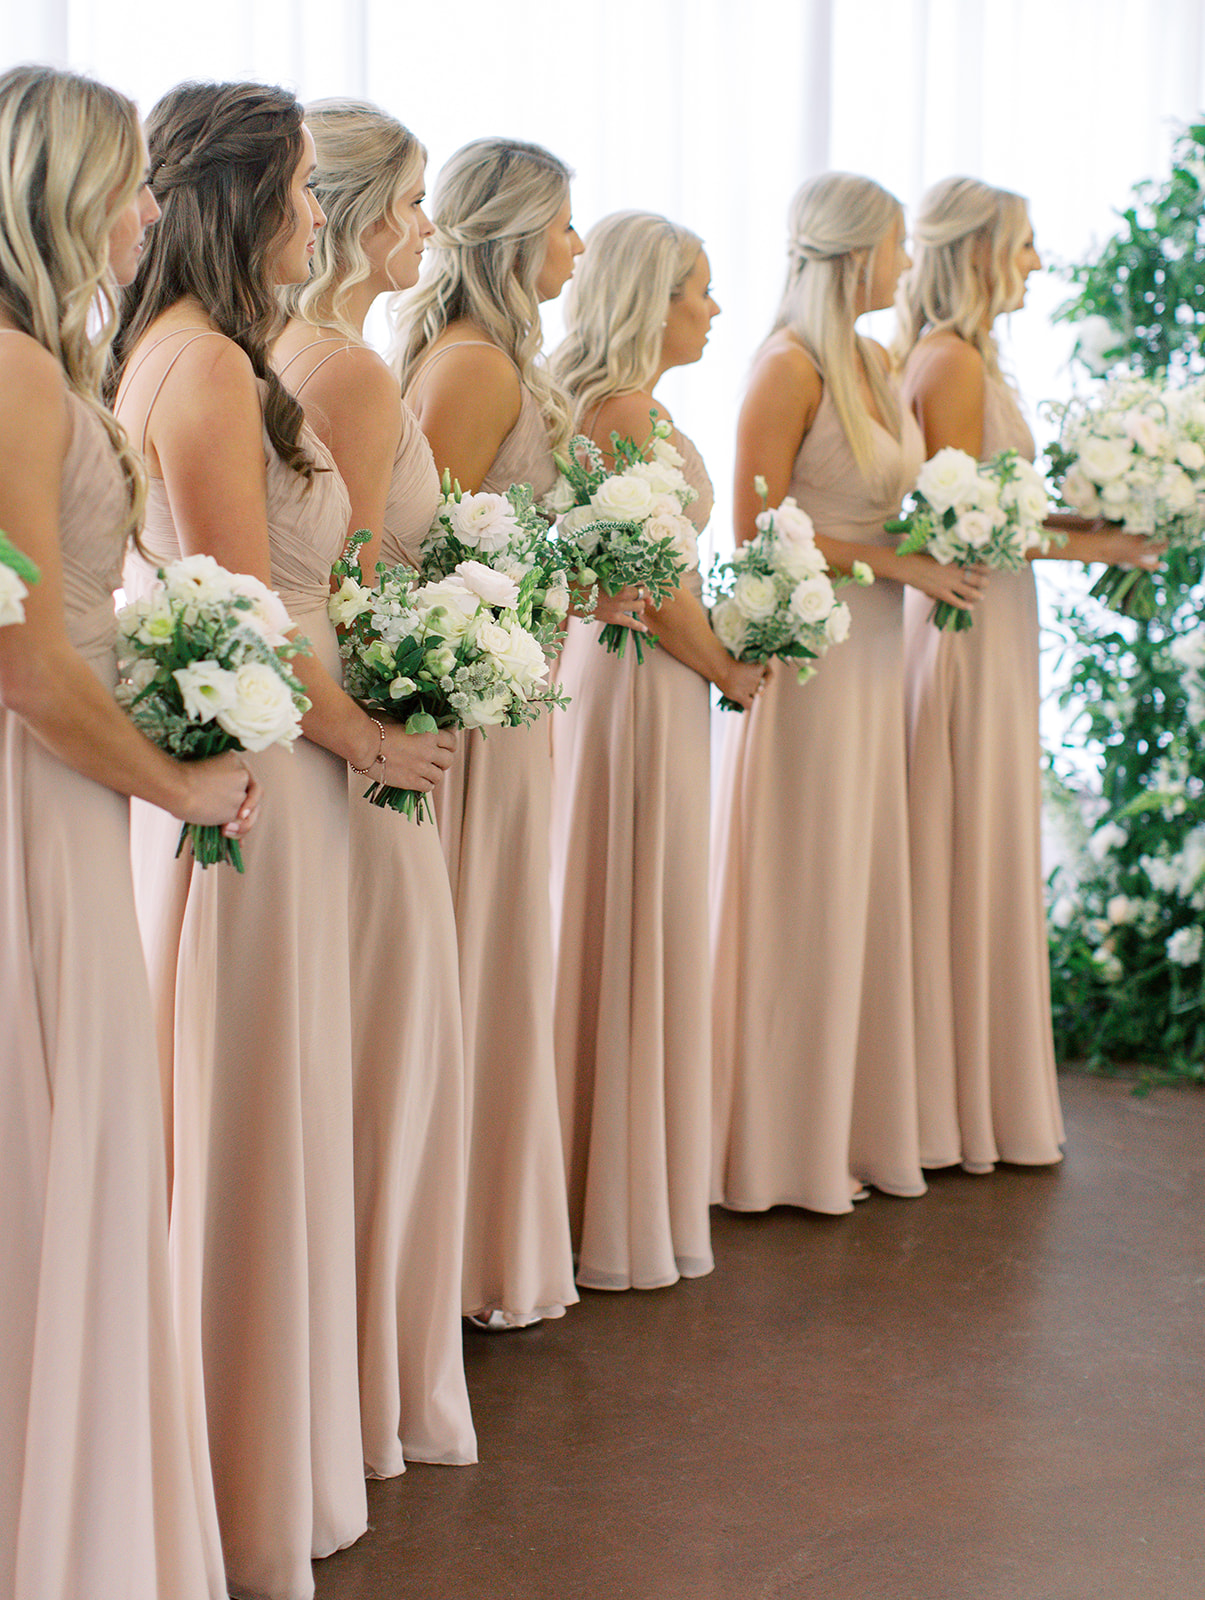 Bridesmaids holding bouquets at Ritz Charles wedding ceremony